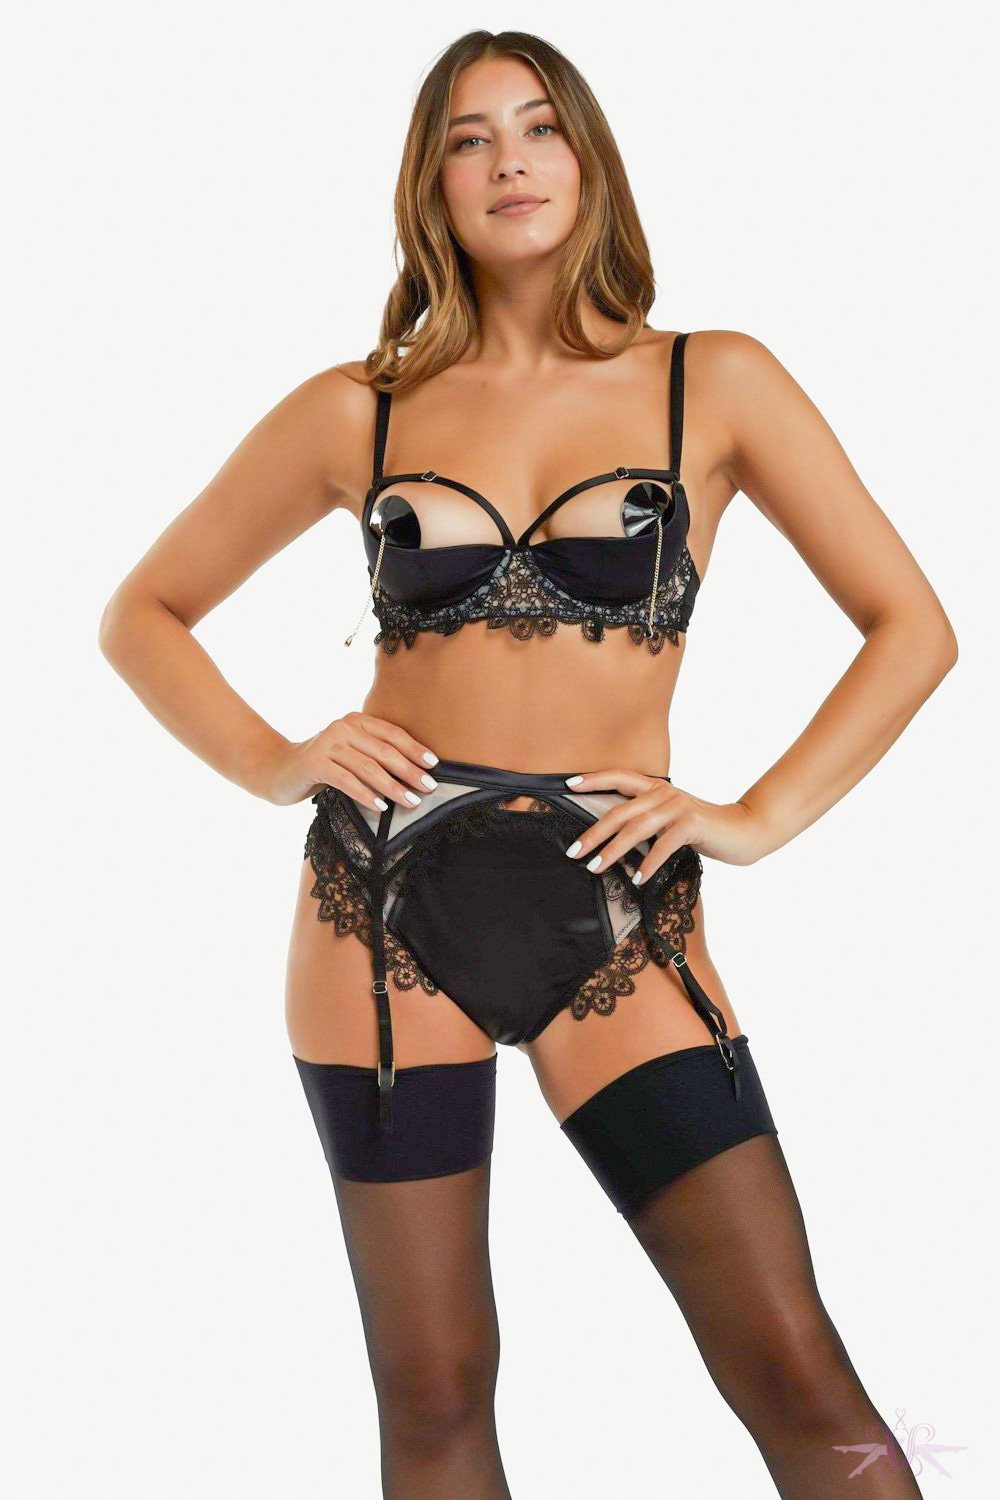 Playful Promises Anaise Quarter Cup Bra At The Hosiery Box, 45% OFF